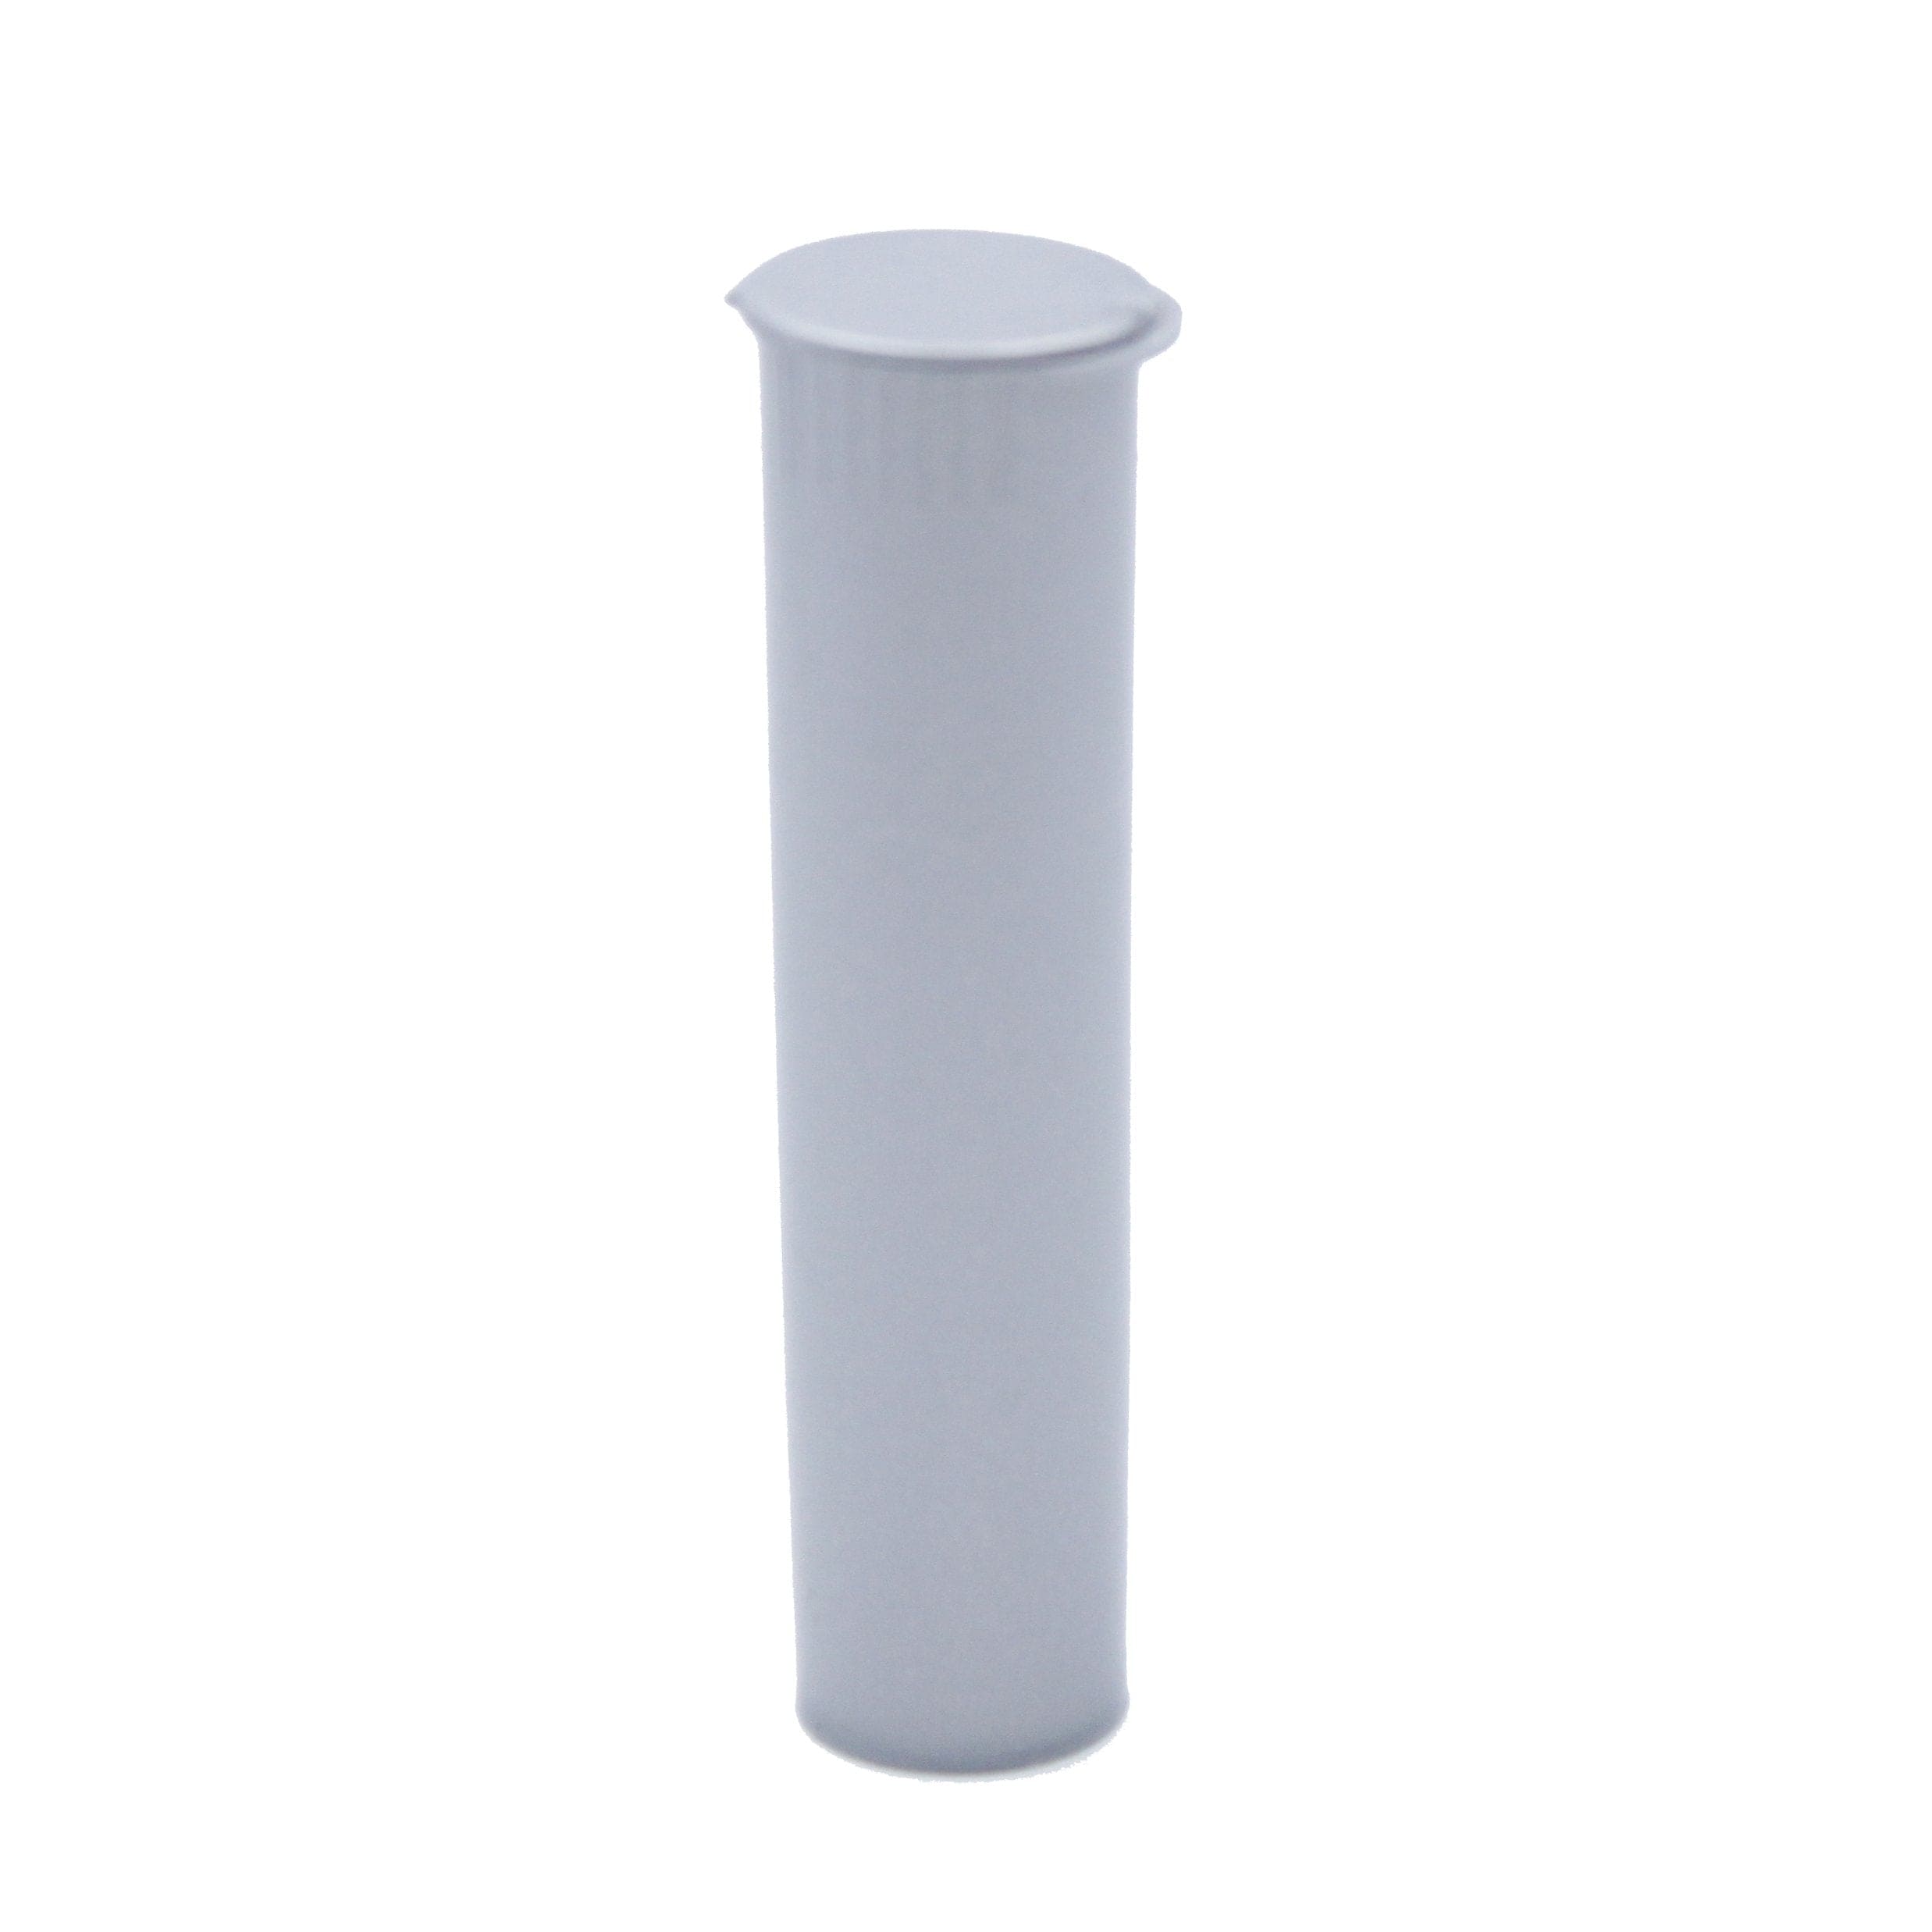 Clearance Squeeze Top Child-Resistant Pre-Roll Tube | 78 mm Silver / Box of 1000 (Bulk Pricing)